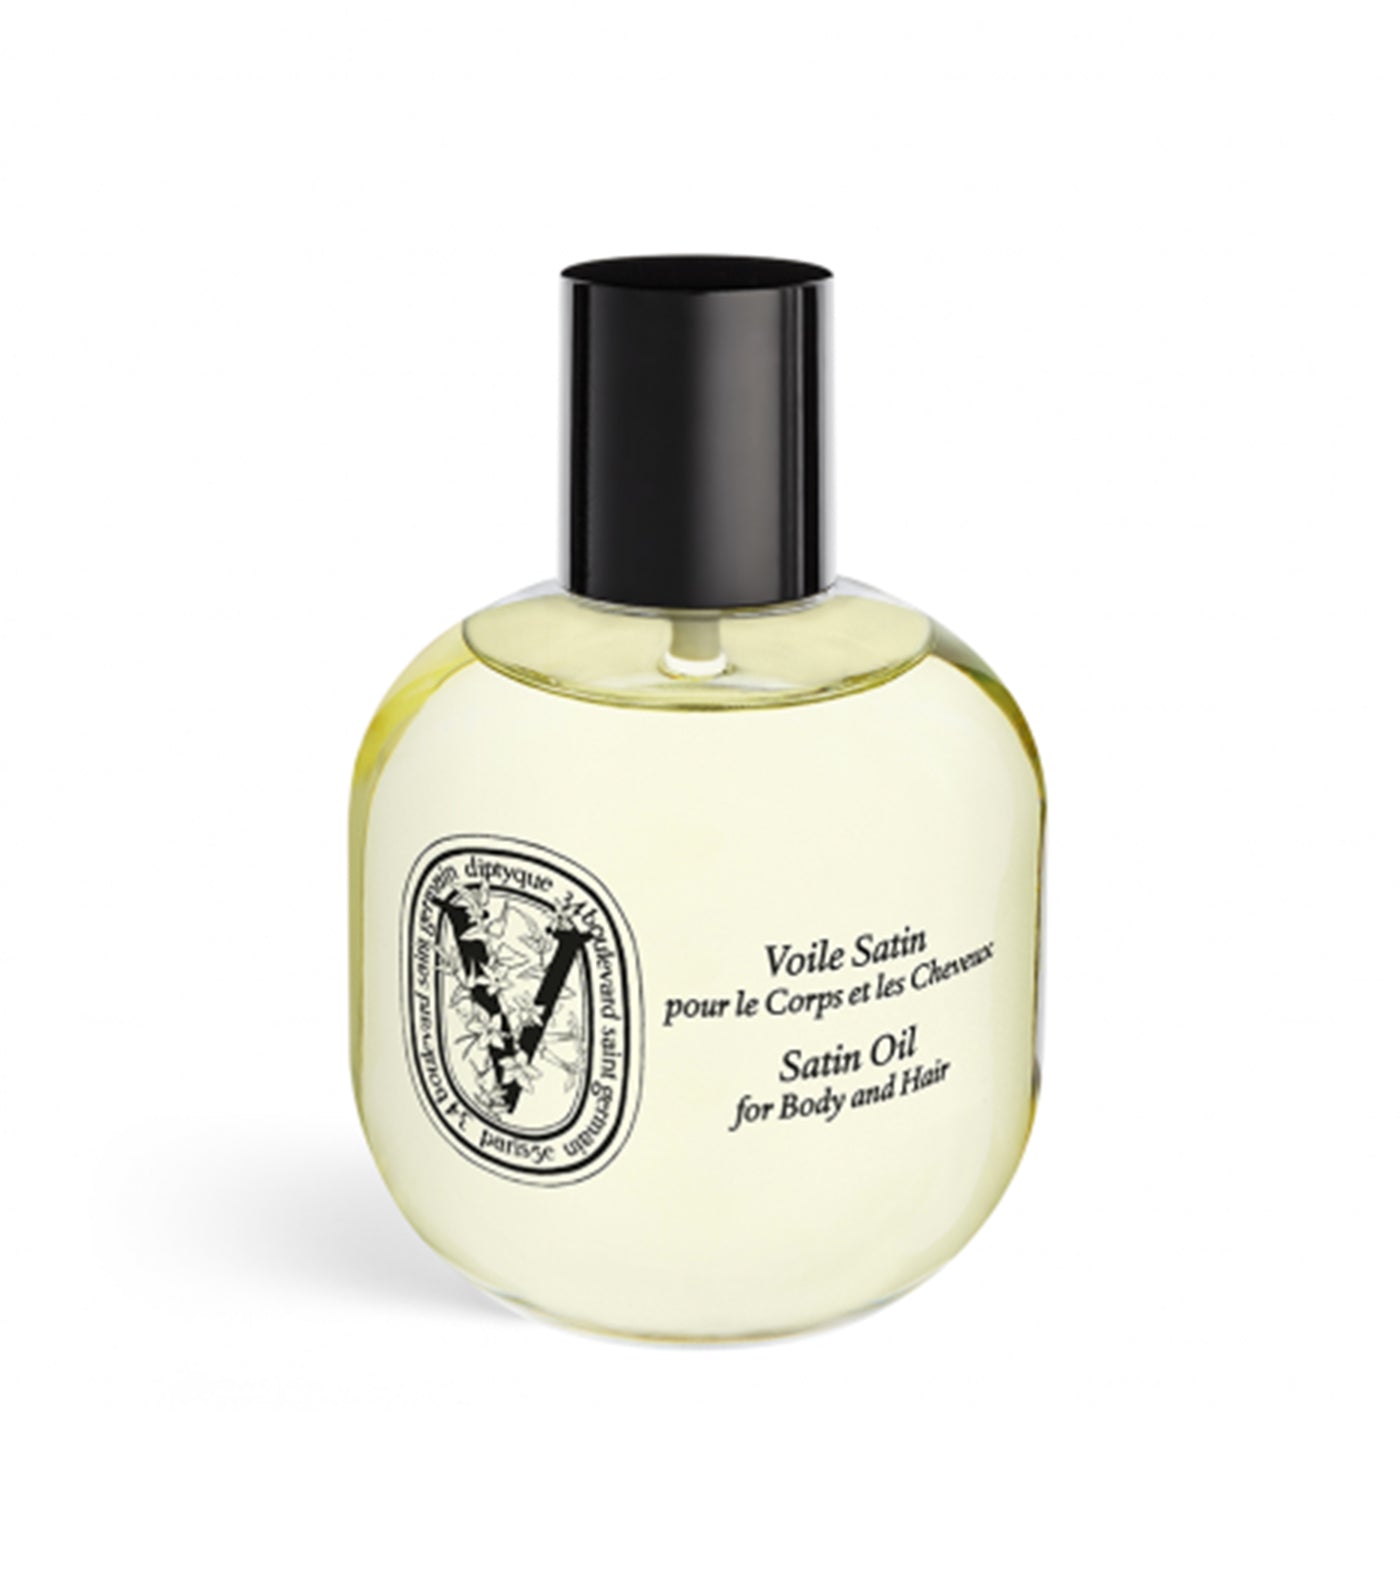 diptyque satin oil for body and hair